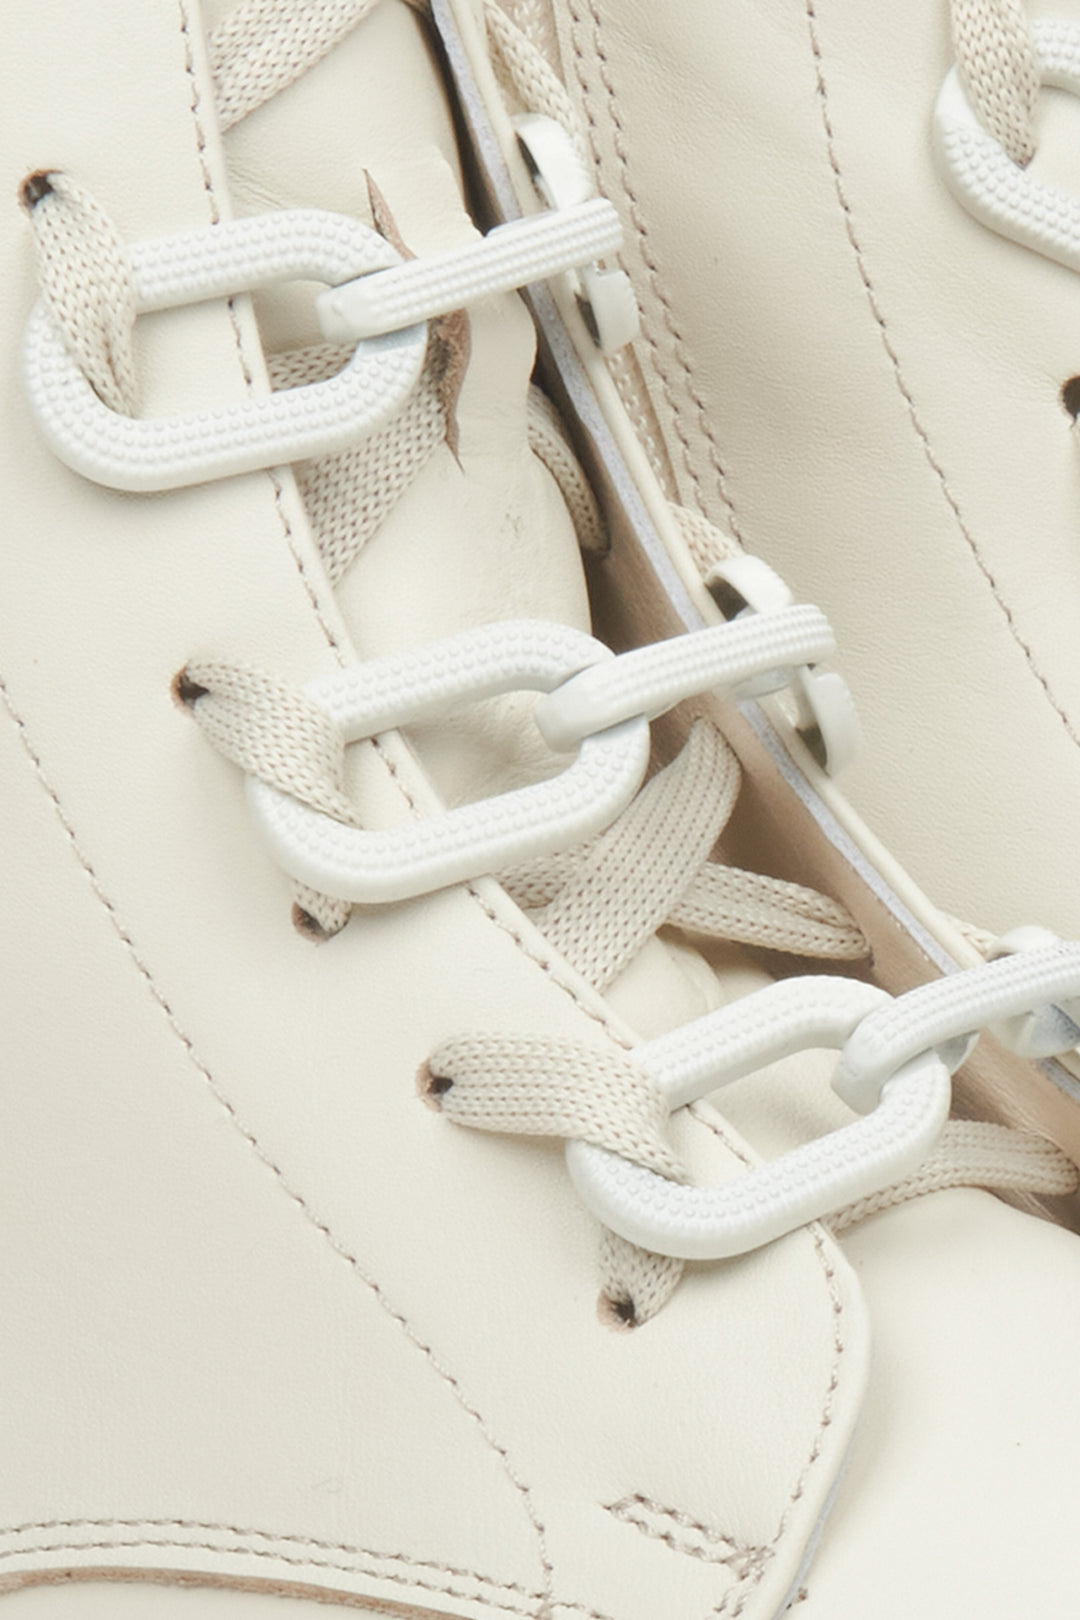 Women's light beige leather insulated ankle boots - a close-upon details.